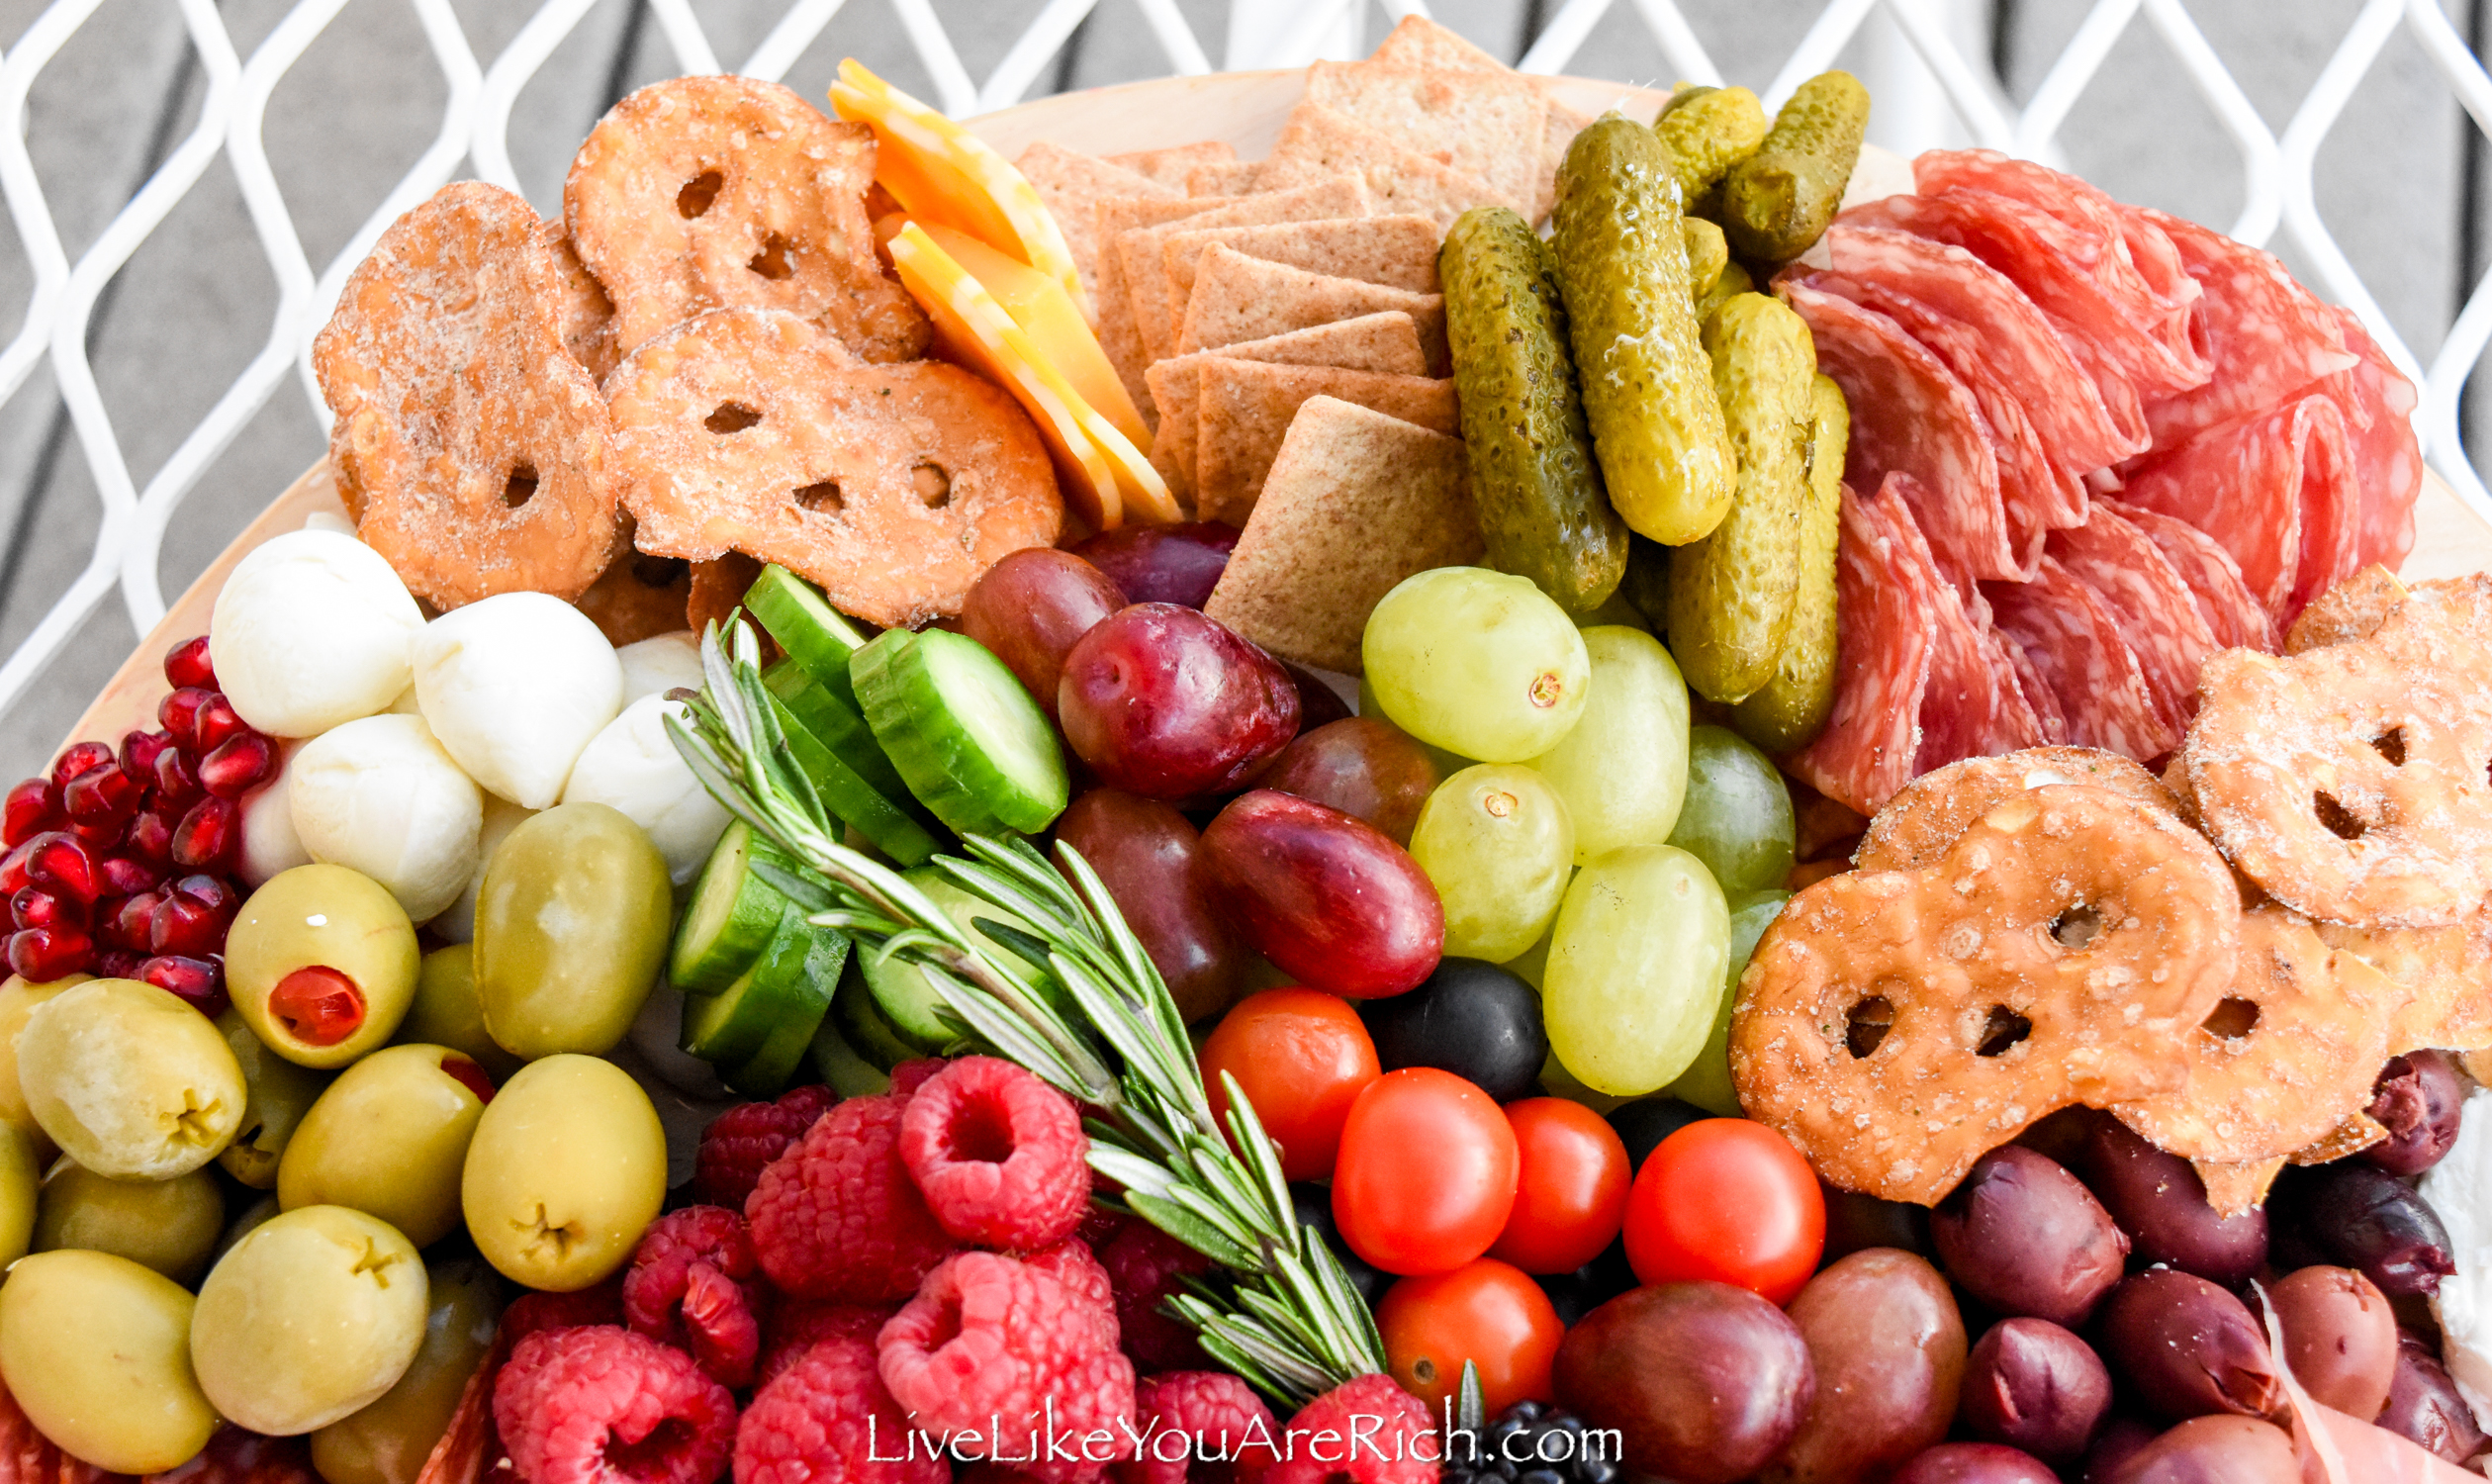 7 Tips to Making an Inexpensive Charcuterie Board